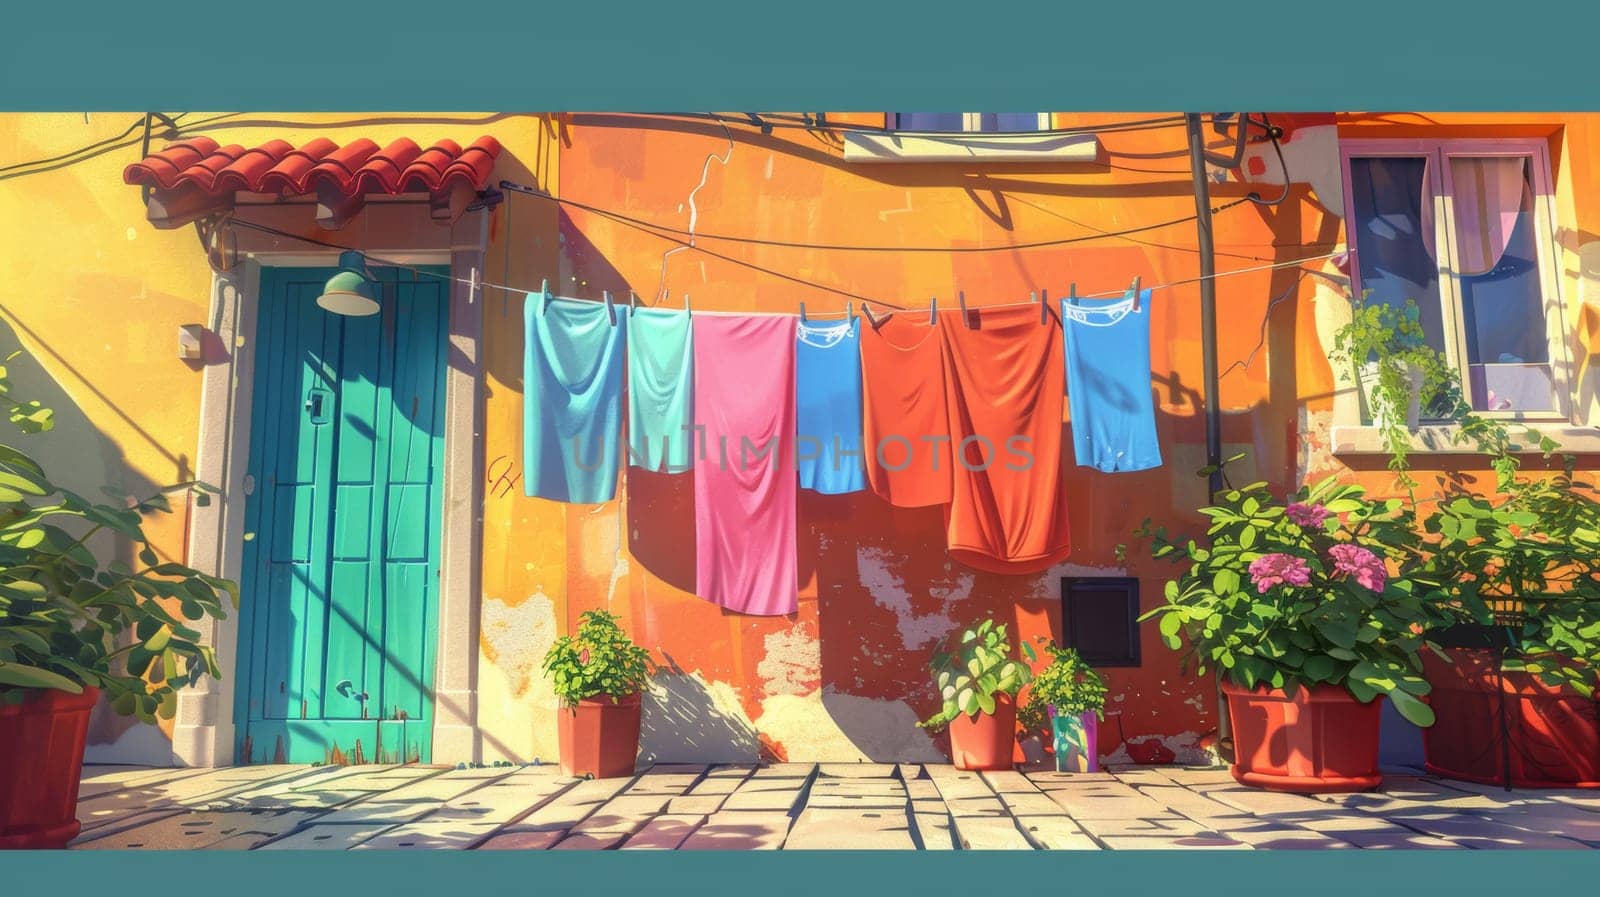 A painting of a colorful house with clothes hanging on the line, AI by starush